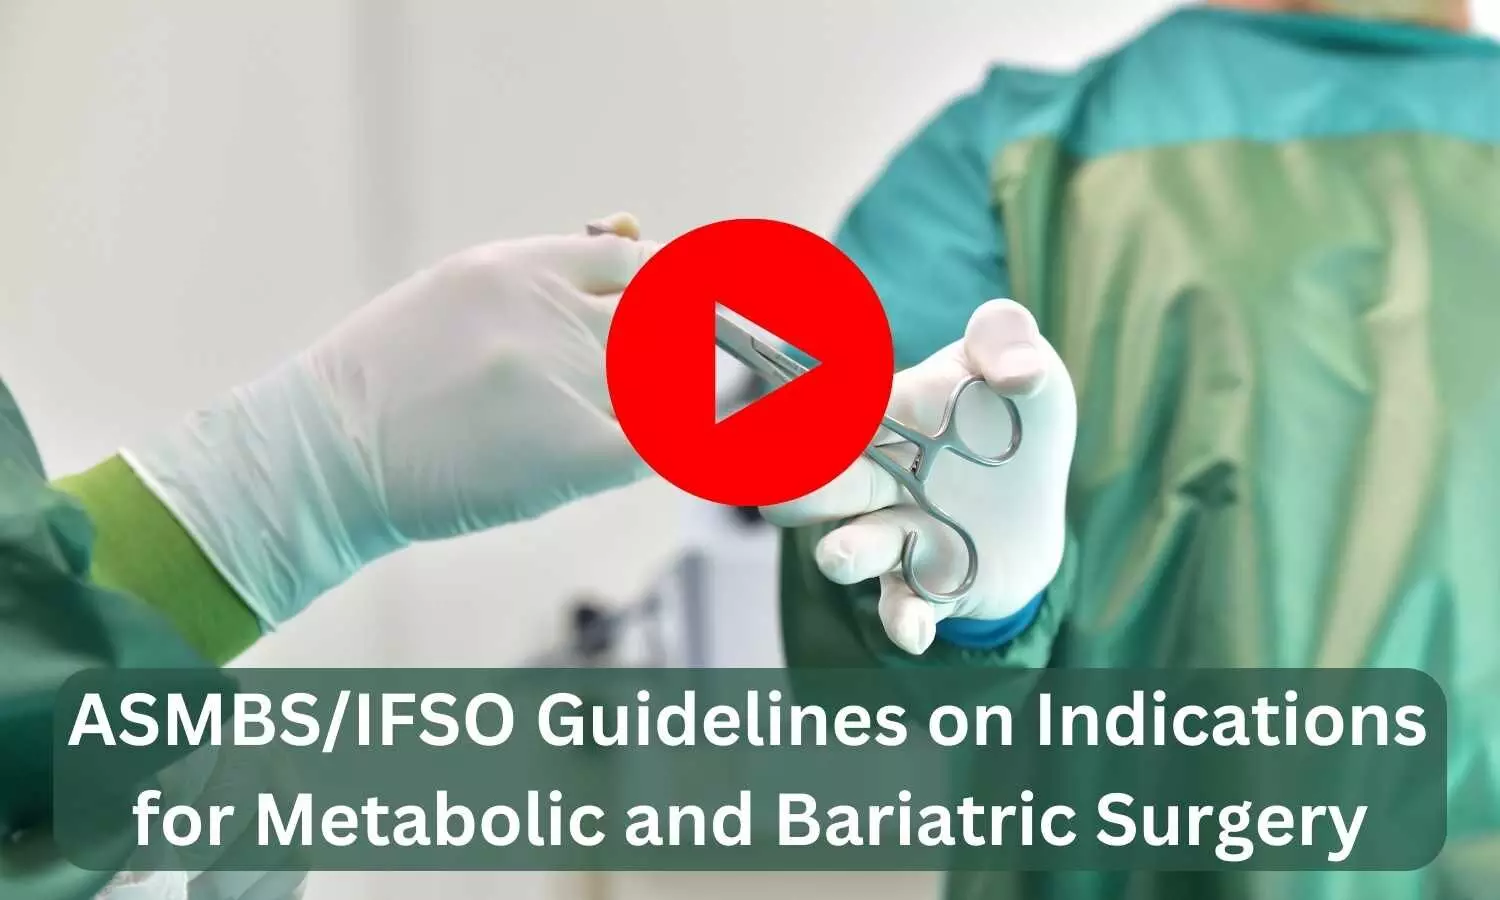 ASMBS/IFSO Guidelines on Indications for Metabolic and Bariatric Surgery